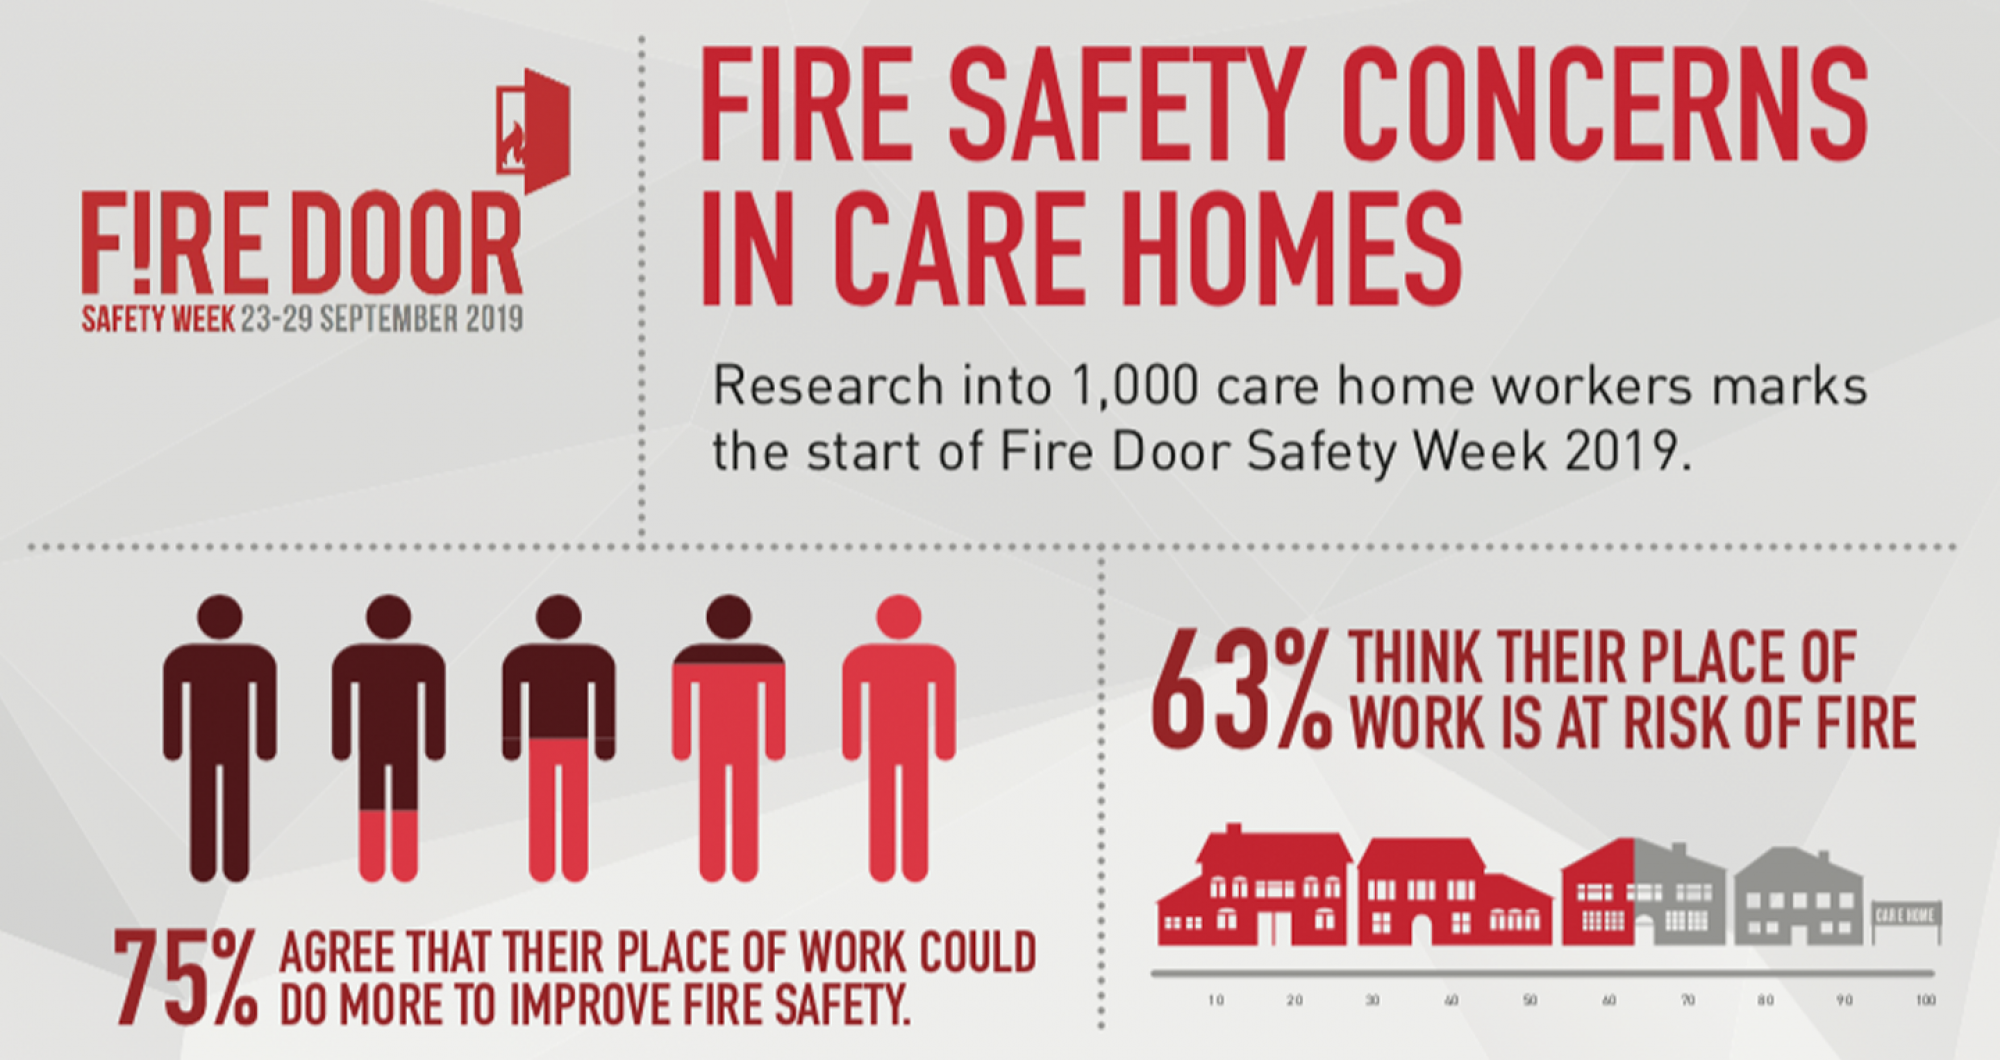 Fire Door Safety Week - Fire Safety Concerns in Care Homes